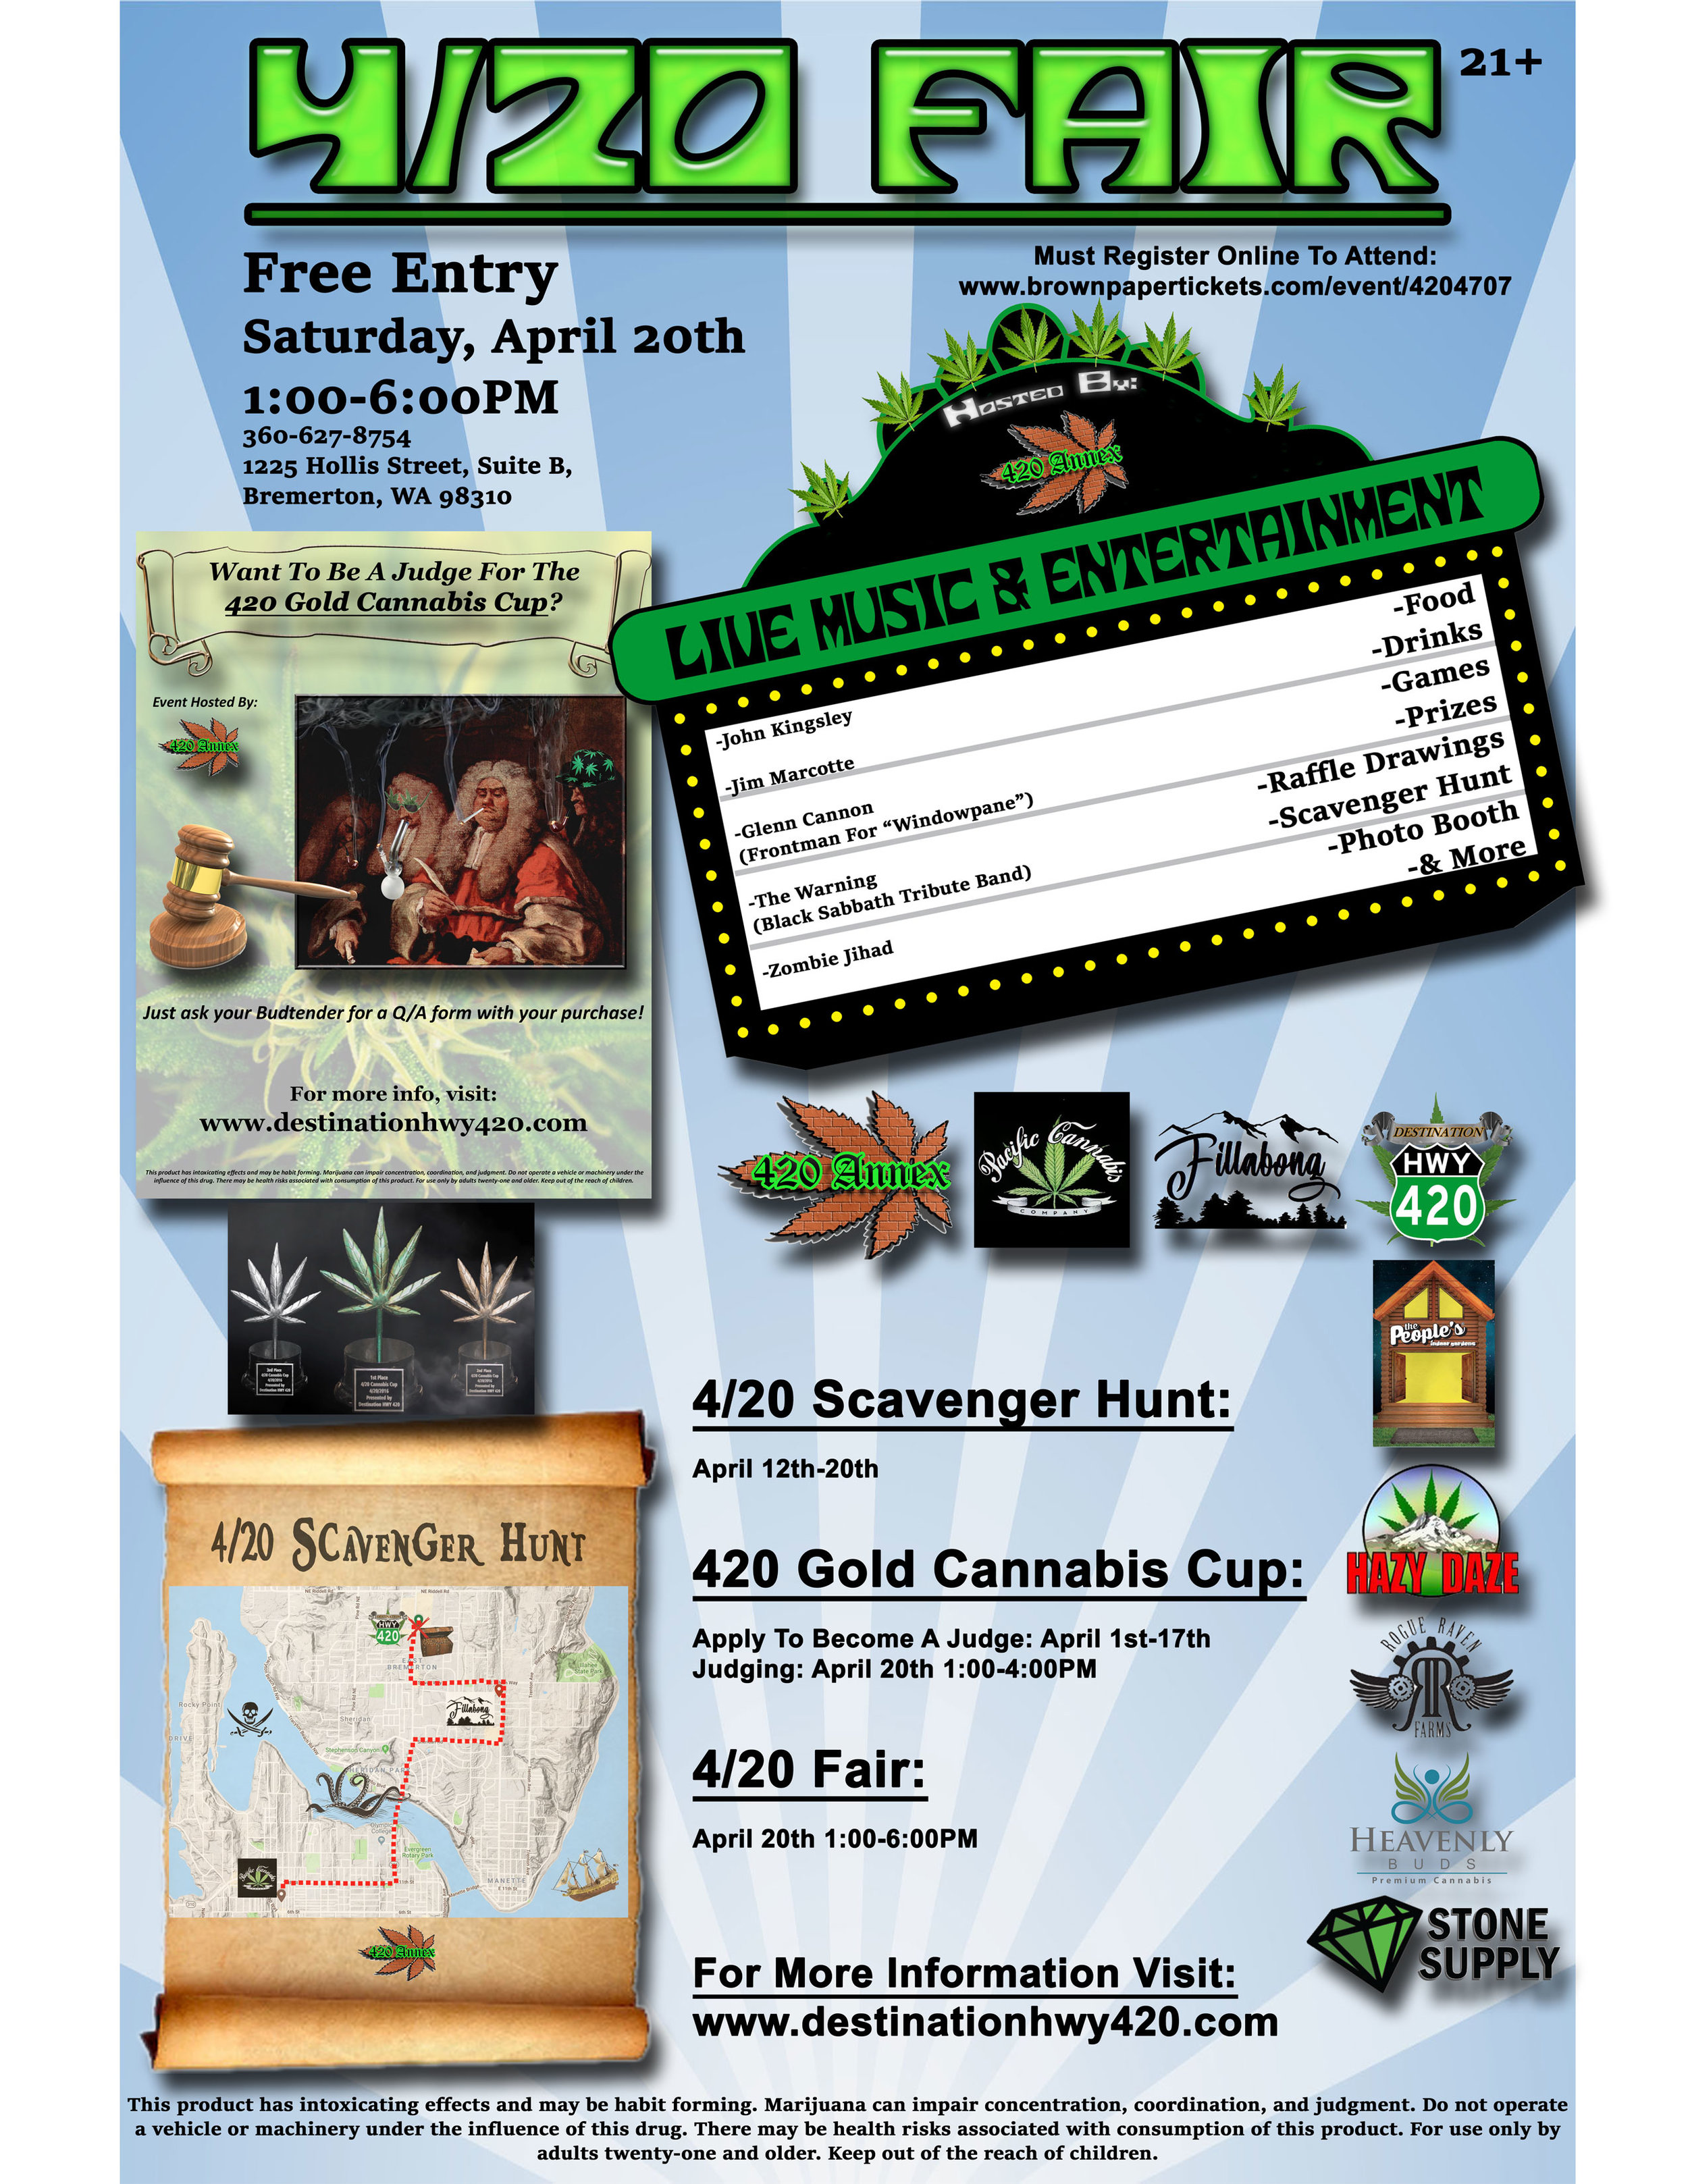 The 4/20 Fair, held in East Bremerton every year, is hosted by the 420 Annex. For 4/20/2019, the Fair will be bigger and better than ever! Join us and the rest of your Best Buds for food, drinks, live music, games, prizes, raffle drawings, scavenger hunts, photo booths, and more. We hope you’ll be joining us and the rest of the Kitsap Cannabis Community for this special Cannabis Culture Holiday.